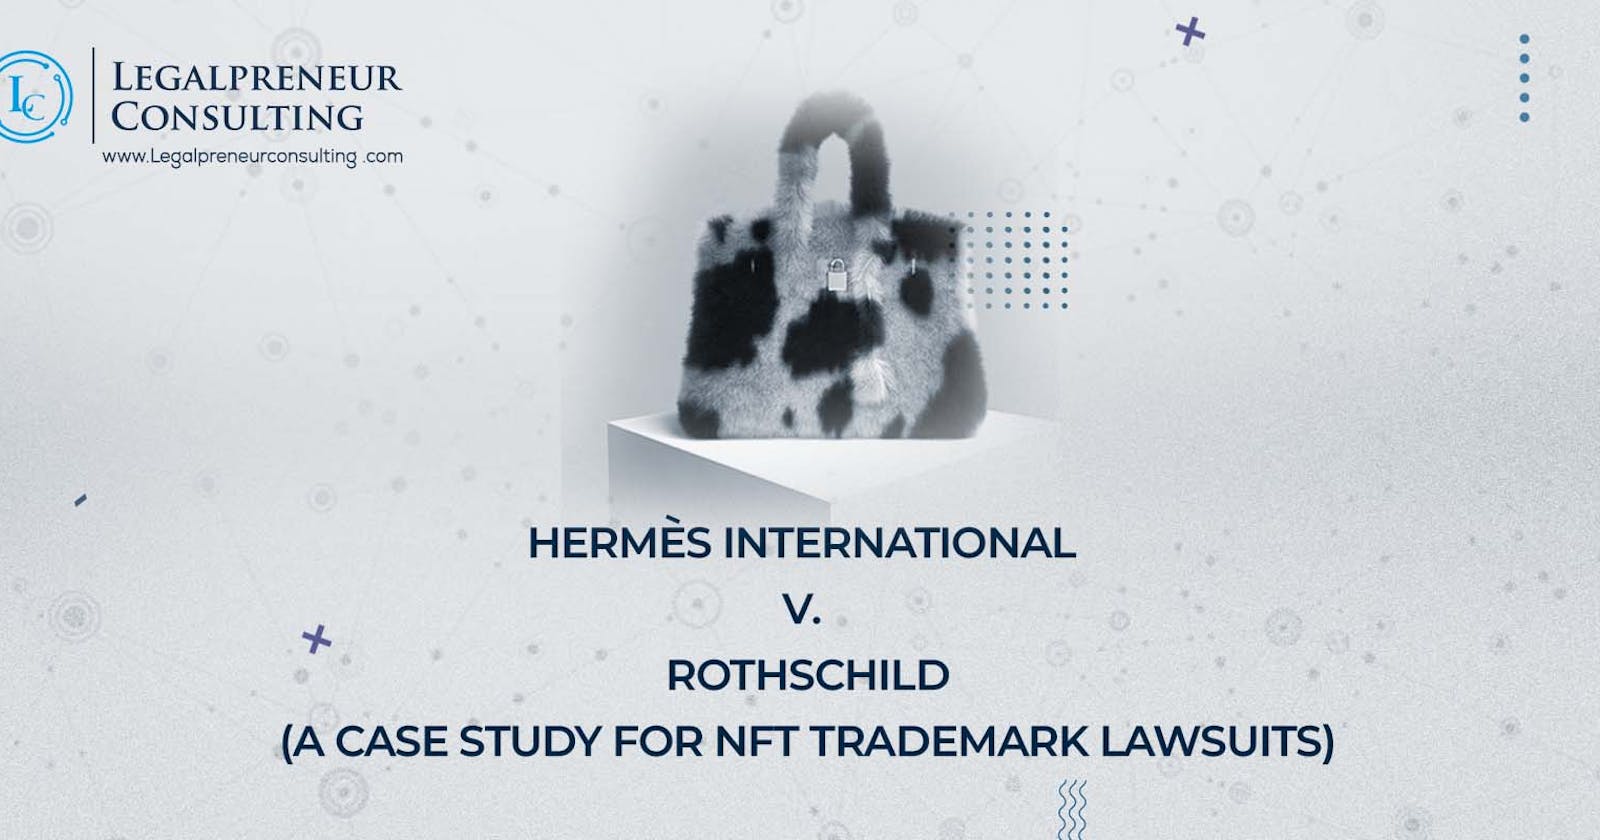 A Case Study for NFT and Intellectual Property Lawsuits: